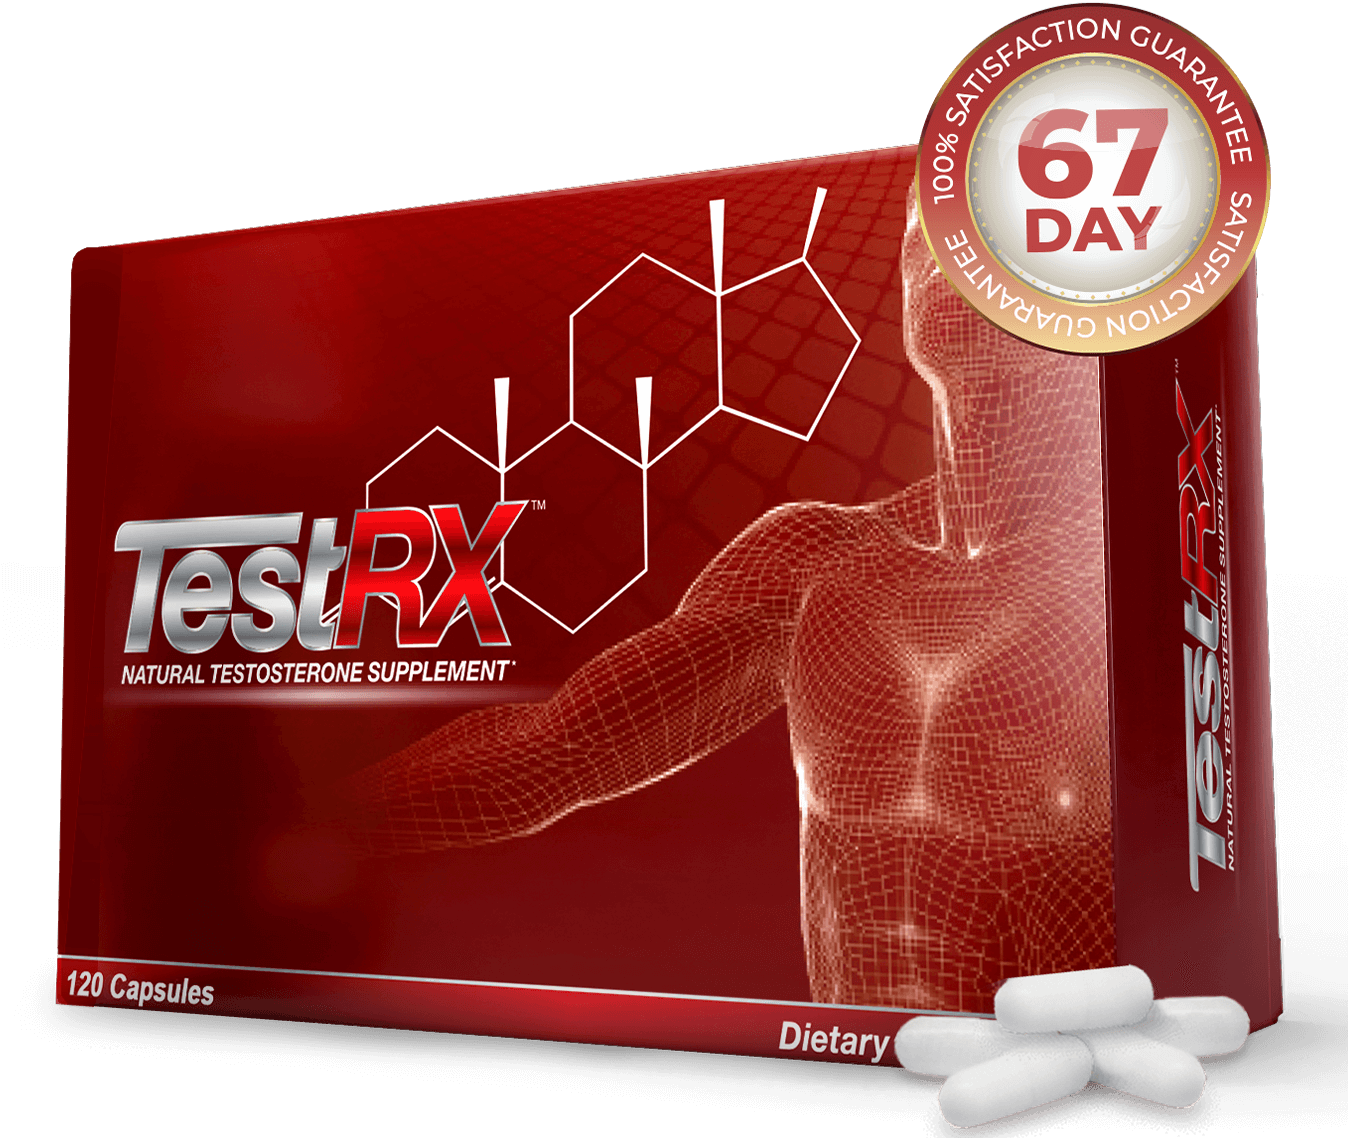 TestRX - Boosts Testosterone For Guys Who Want Bigger Muscles